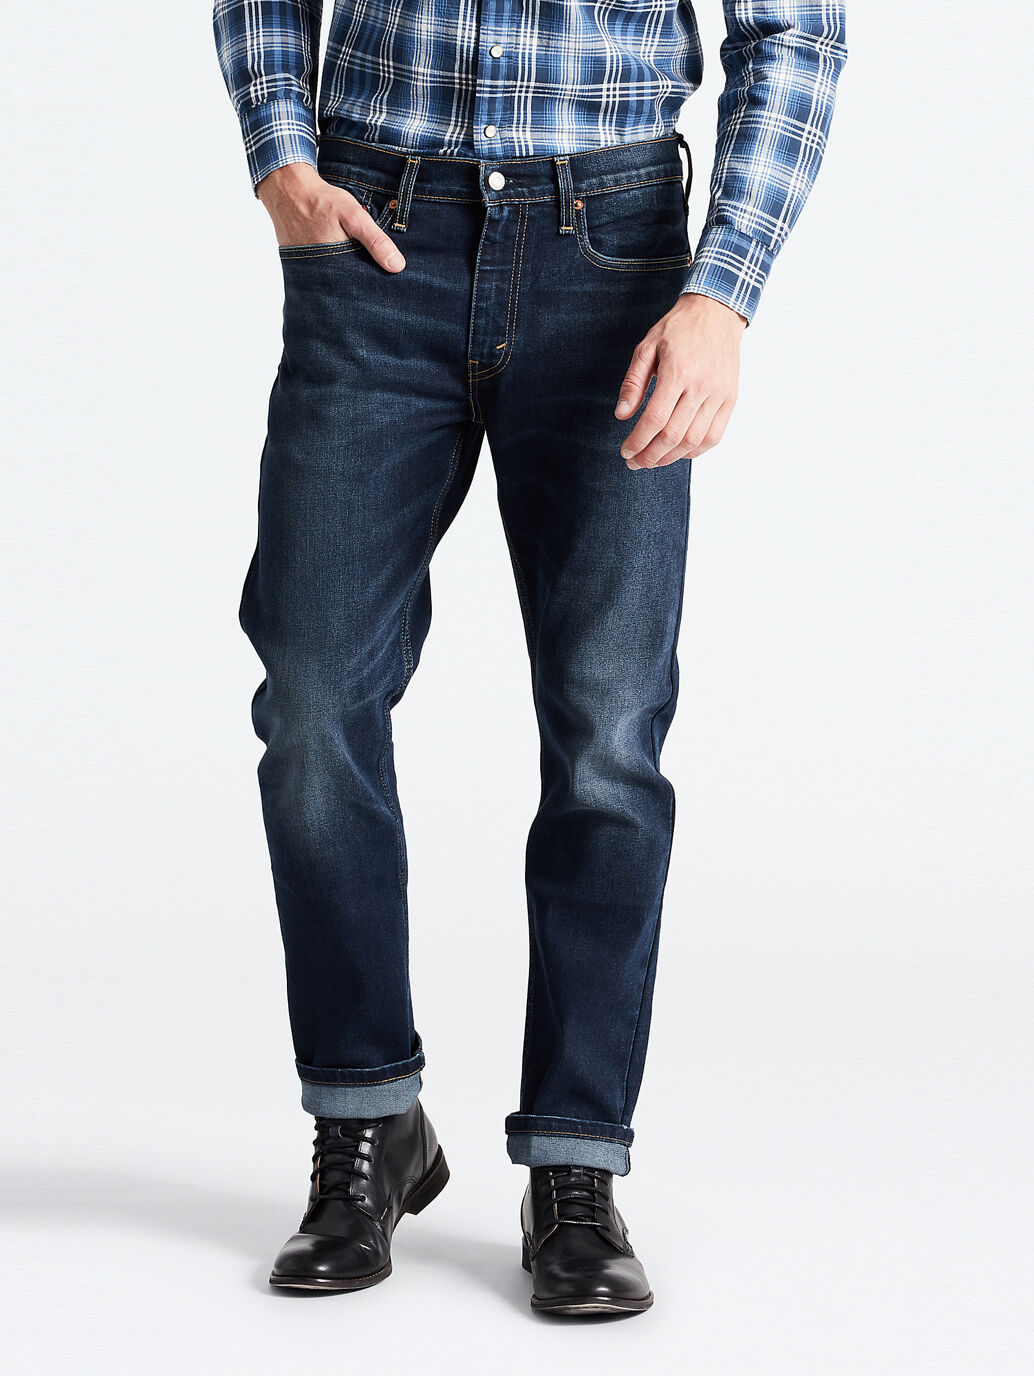 tapered fit jeans mens